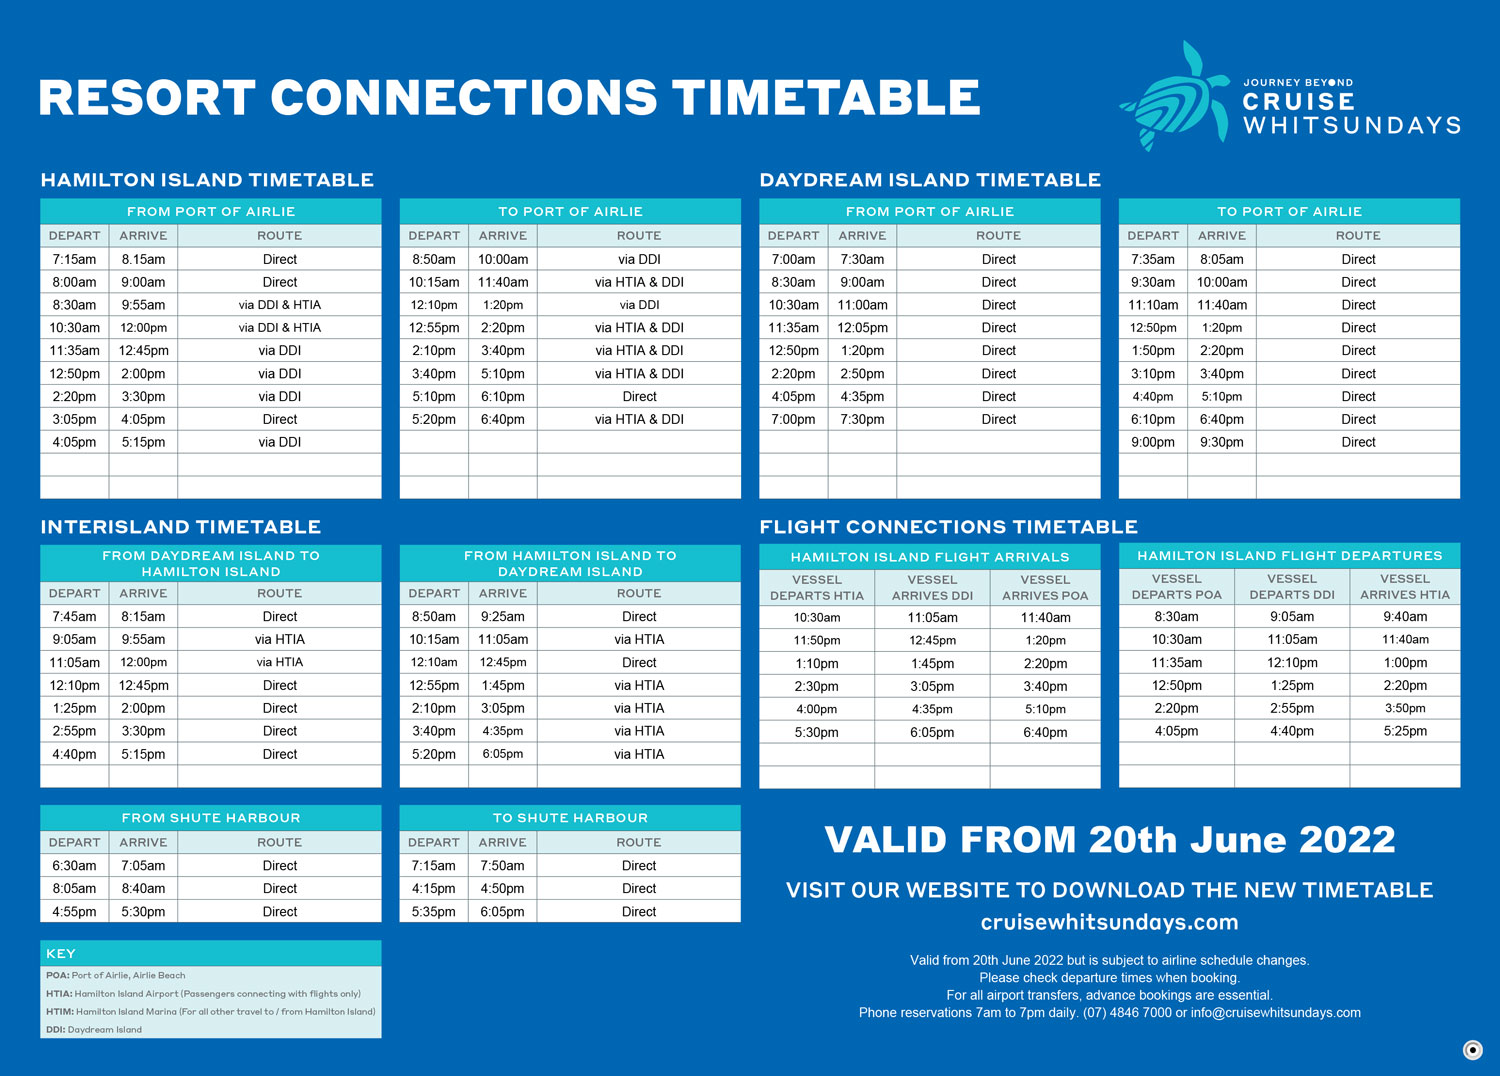 NEW RESORT CONNECTIONS TIMETABLE